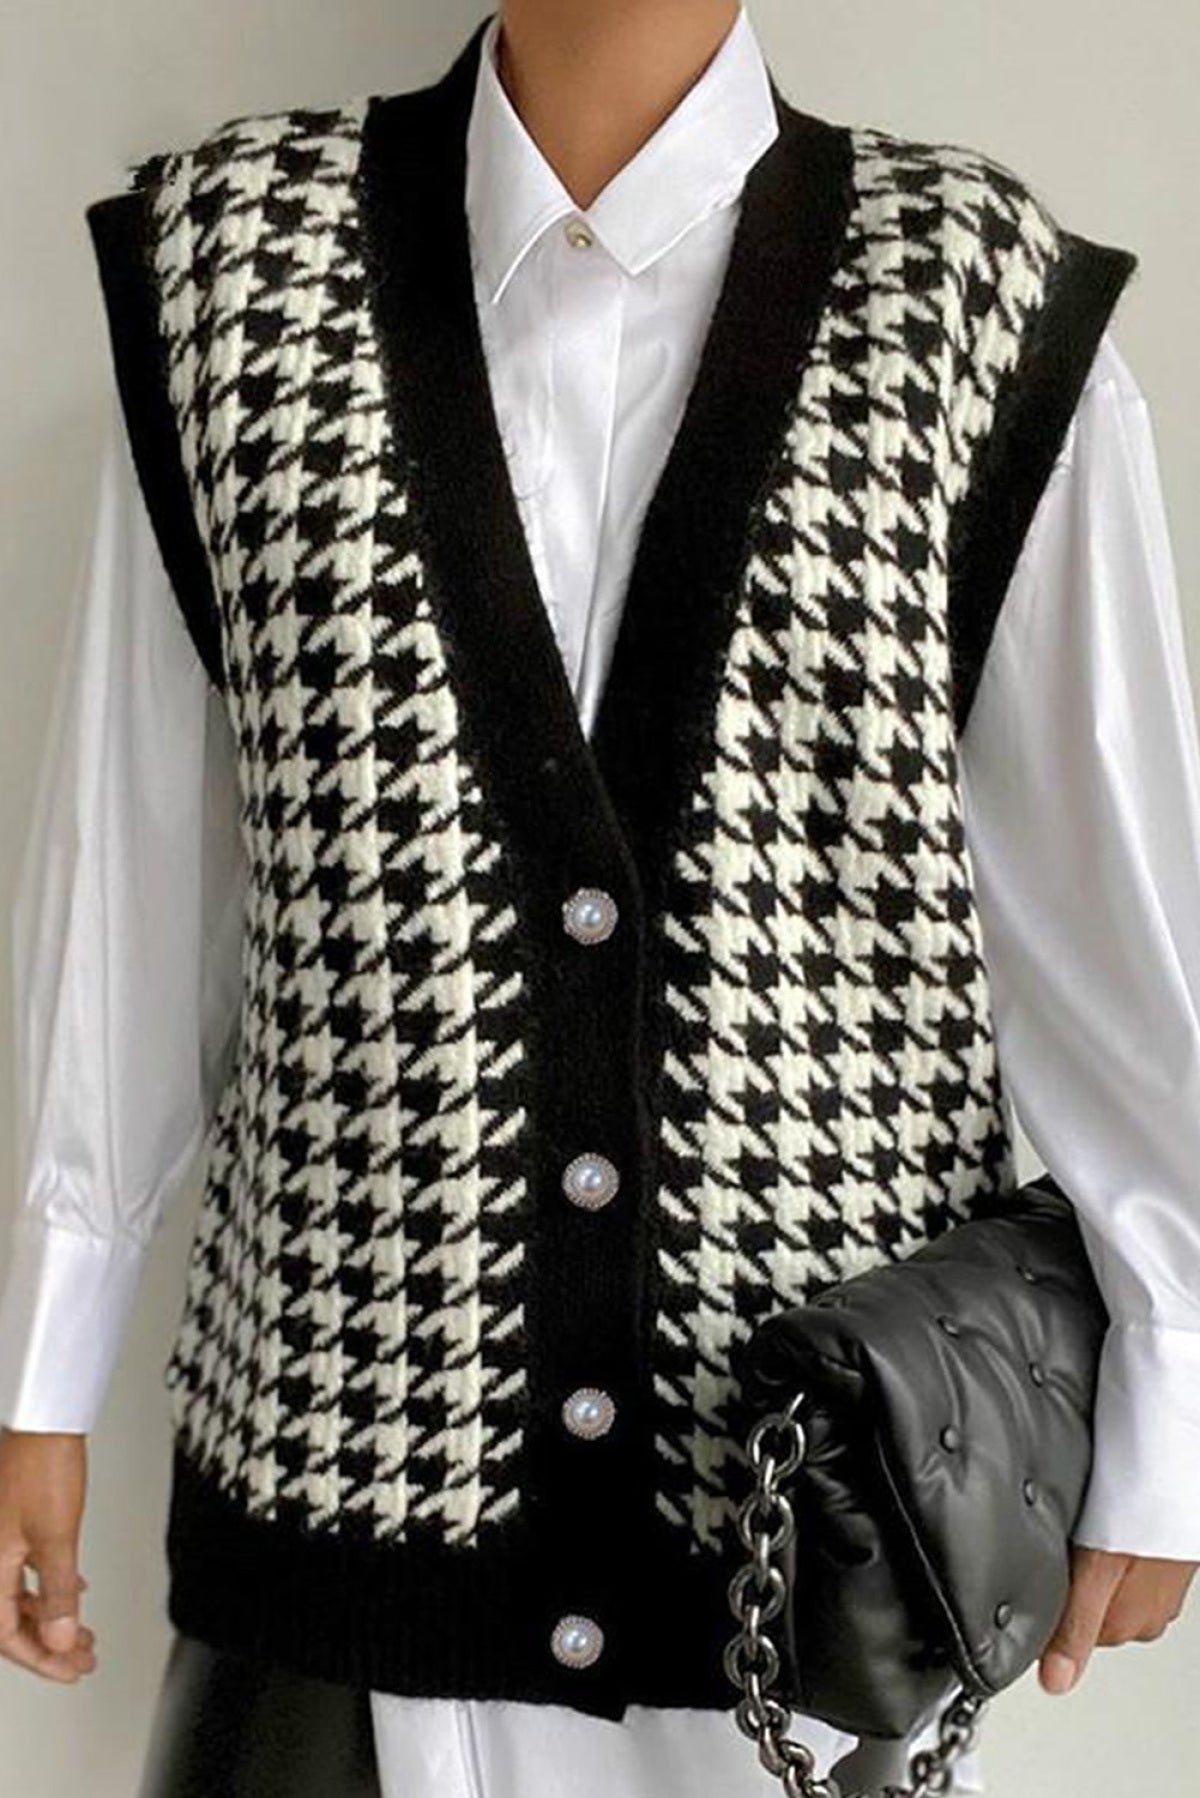 Houndstooth Vest Cardigan - Passion of Essence Boutique